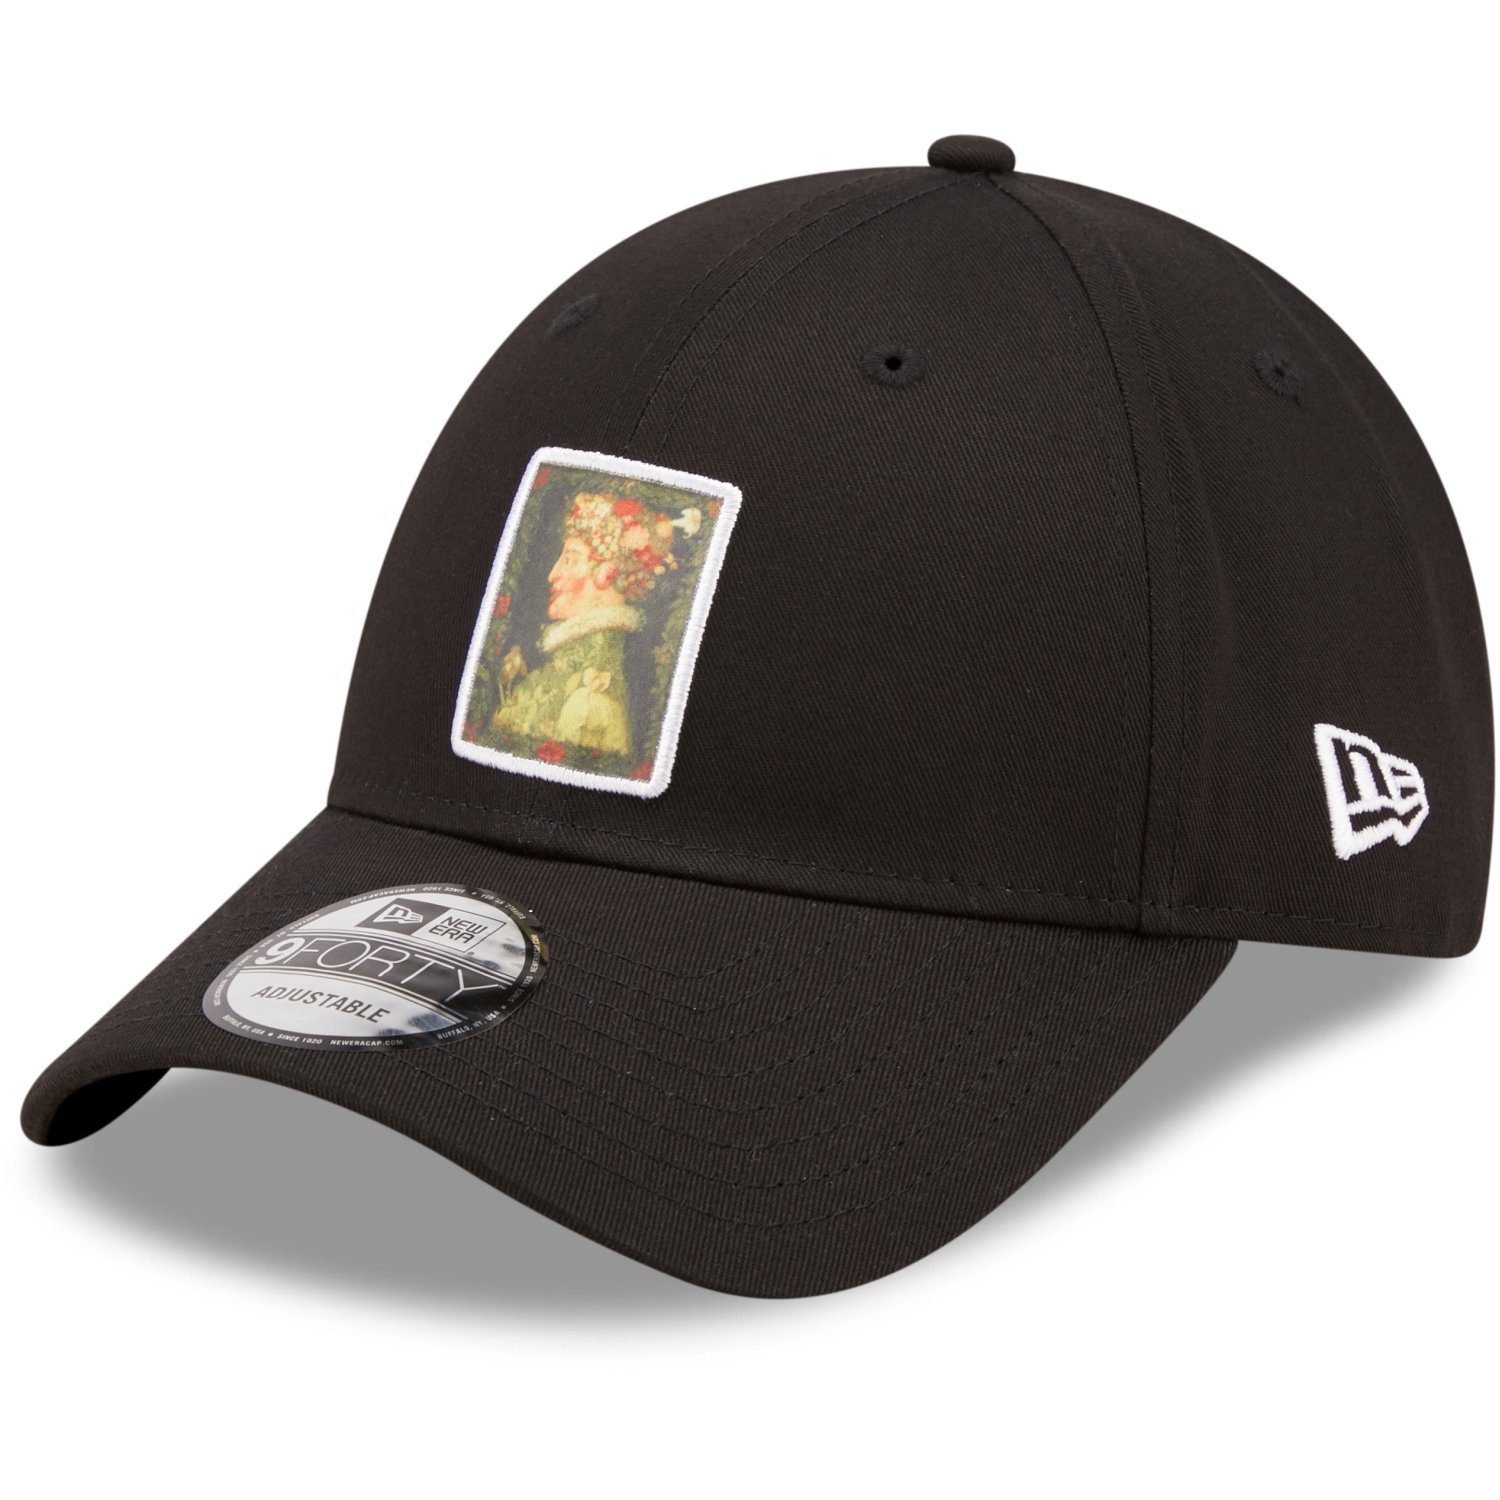 New Era Trucker Cap 9Forty Strapback LOUVRE PATCH Spring Series